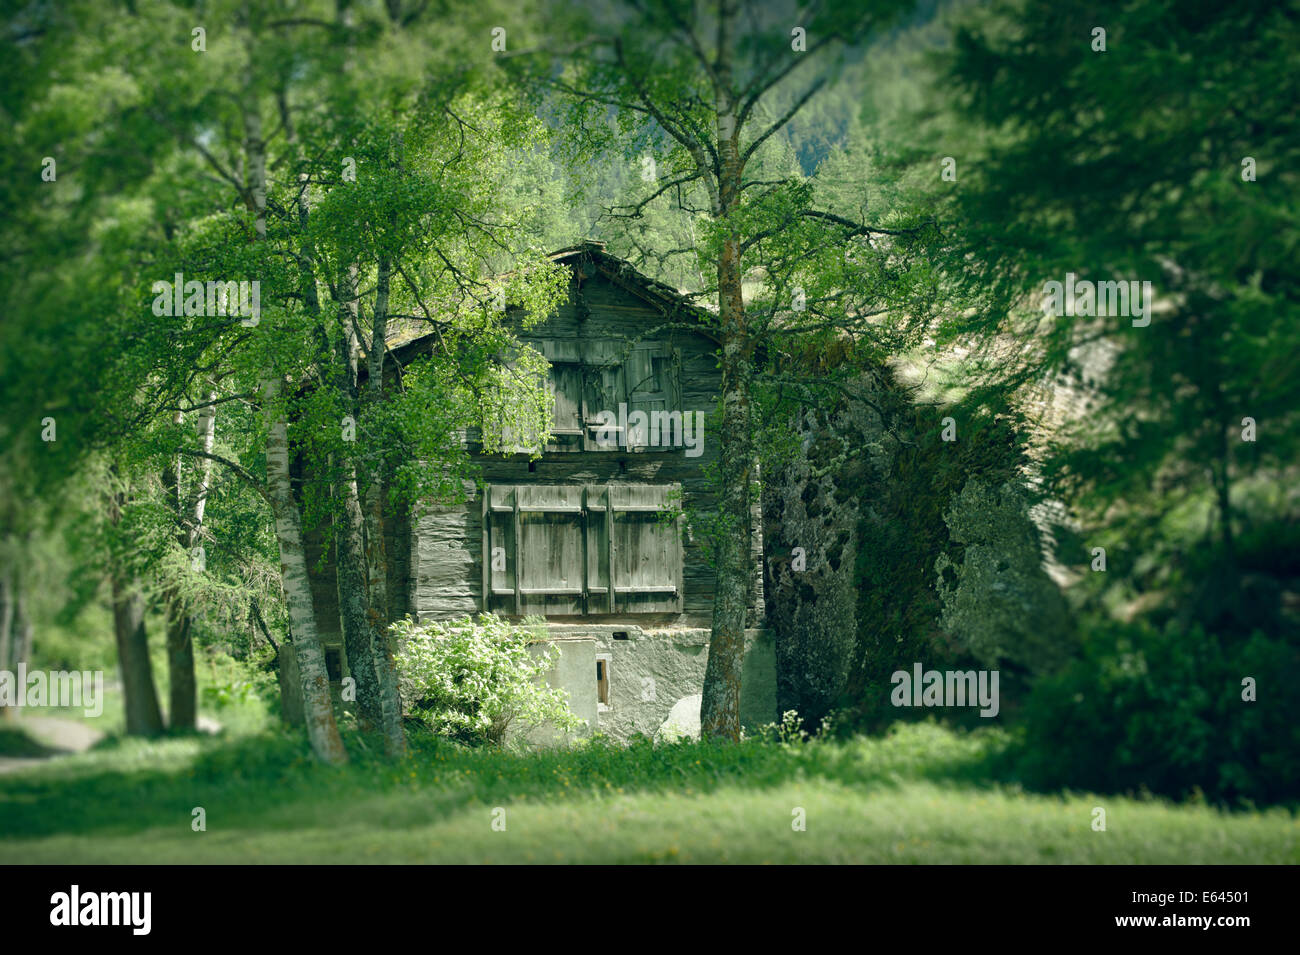 Old wooden barn between trees in Saas-Ground. For effect, some blur was added to the surrounding trees. Stock Photo